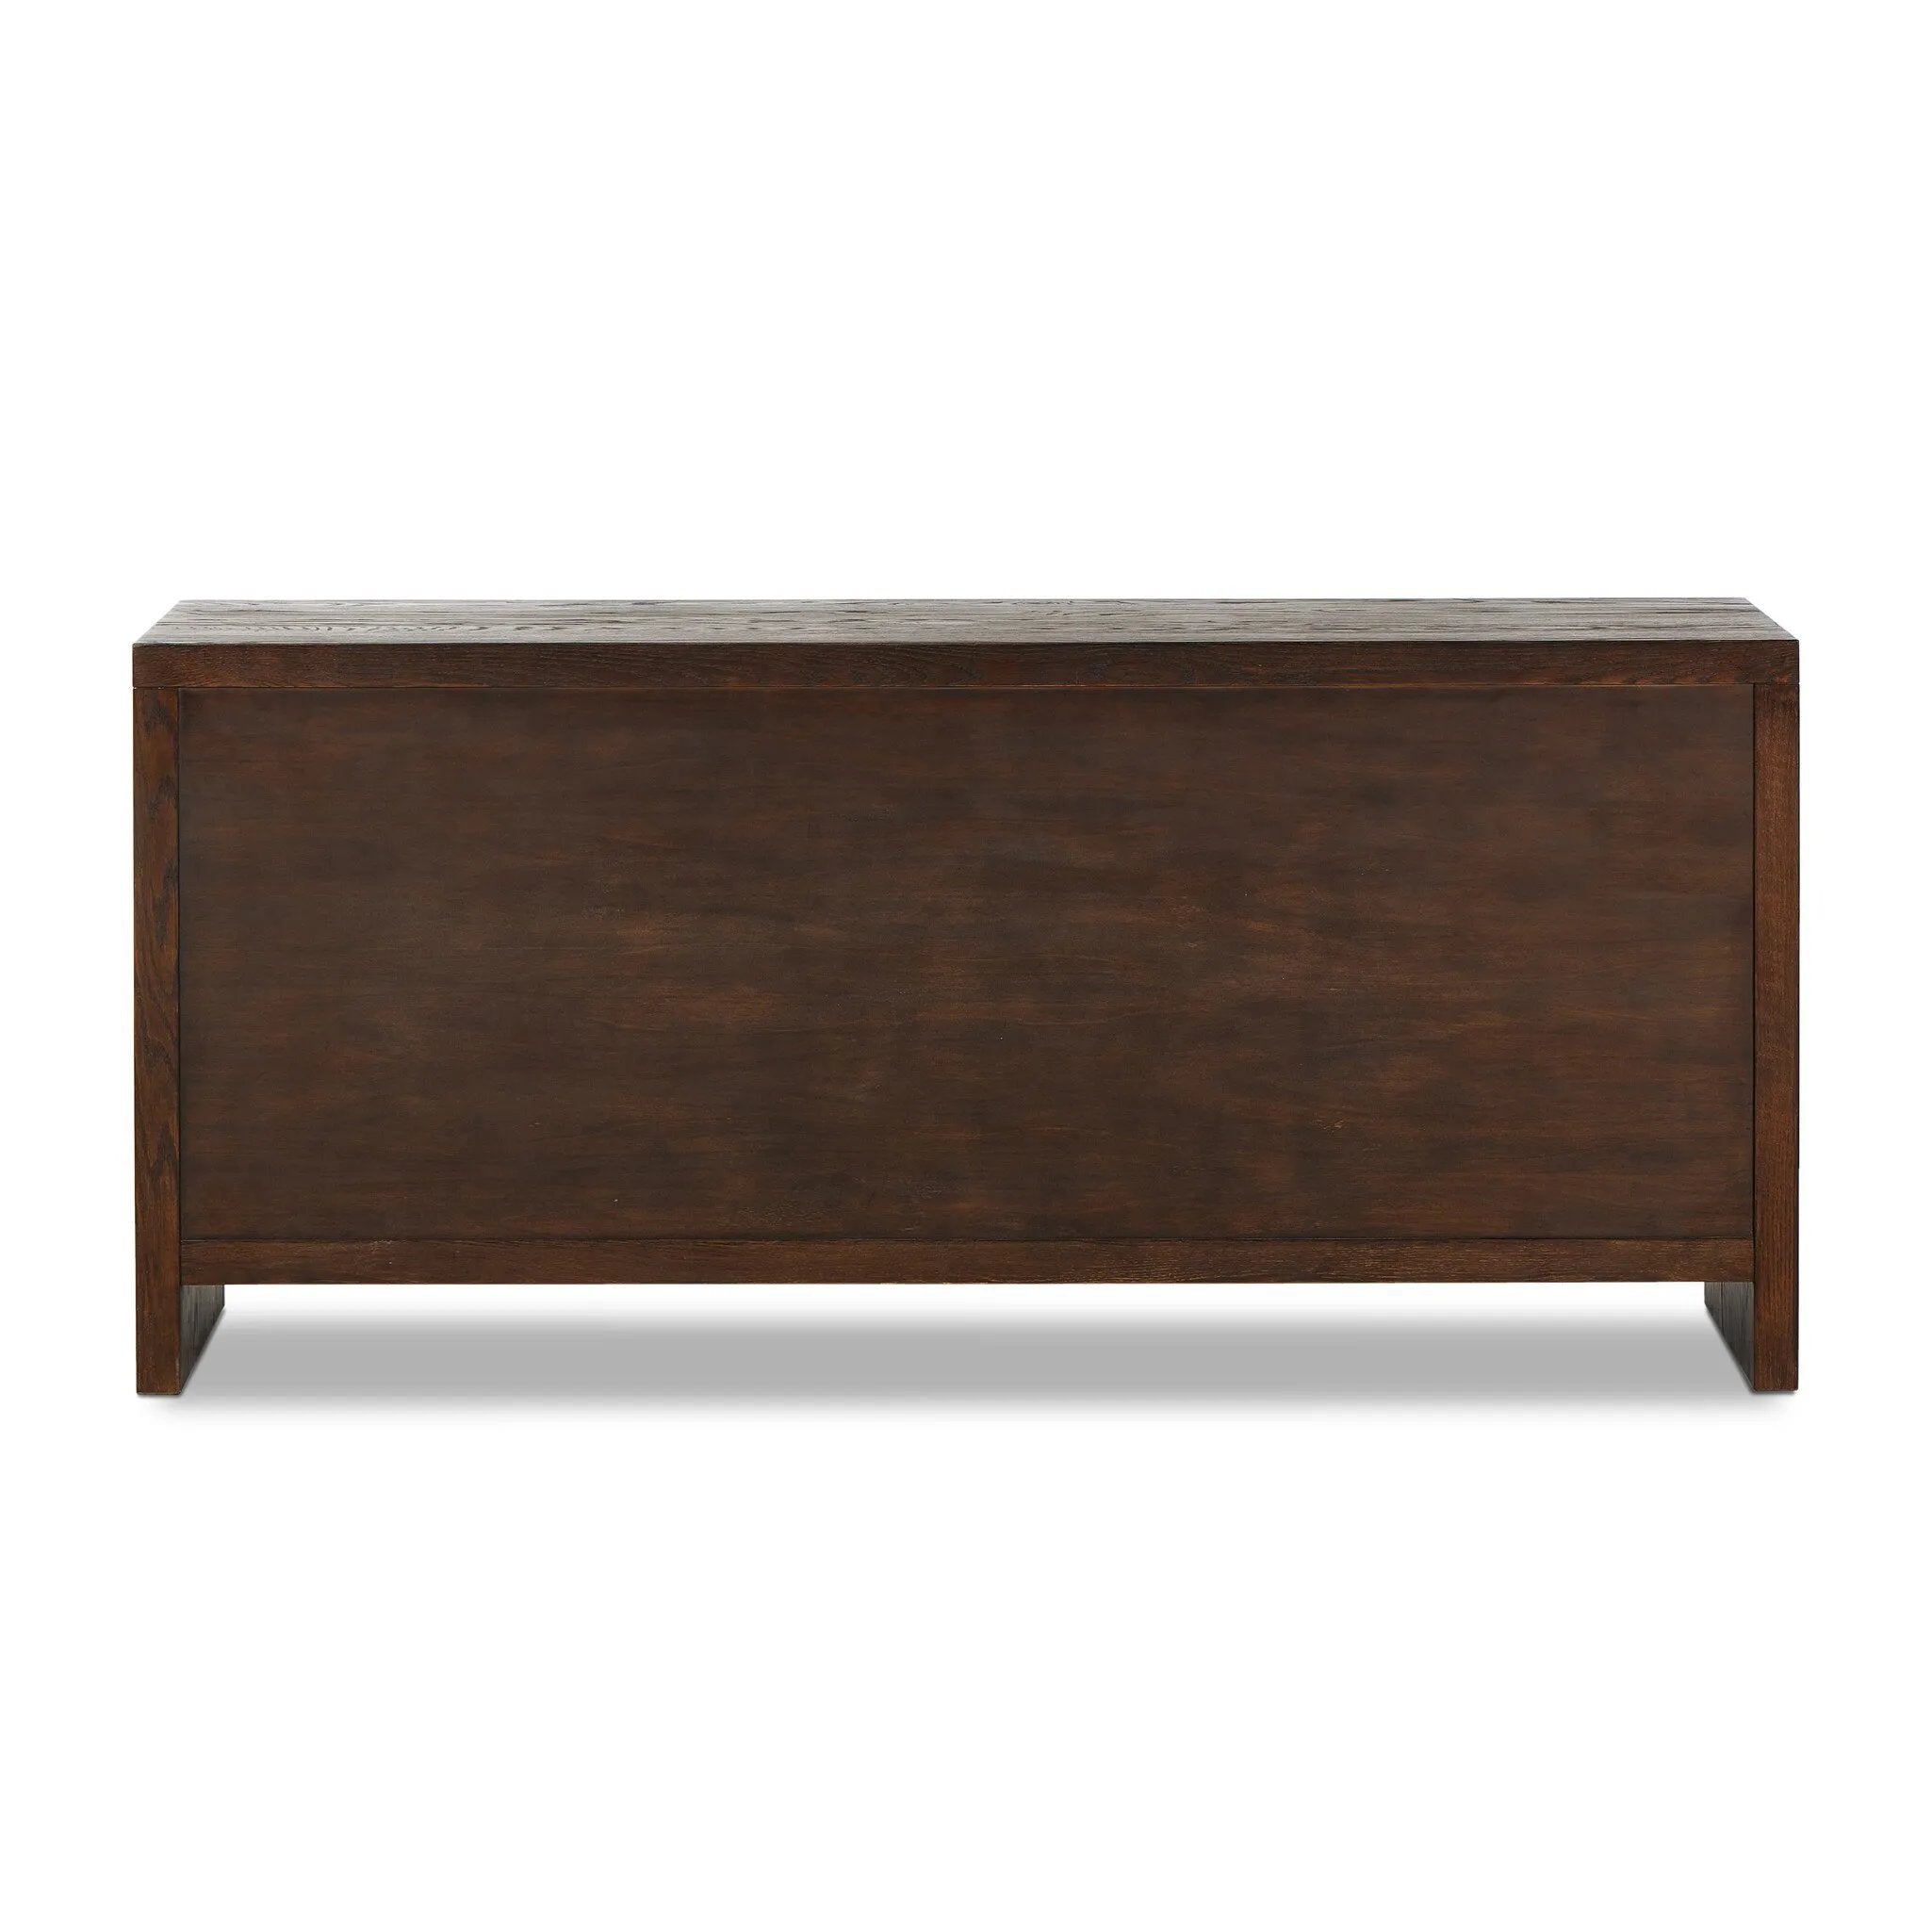 Straight planks of solid umber oak and veneer encase this spacious dresser for an understated modern look. Deep wood grain adds natural character.Collection: Hamilto Amethyst Home provides interior design, new home construction design consulting, vintage area rugs, and lighting in the Seattle metro area.